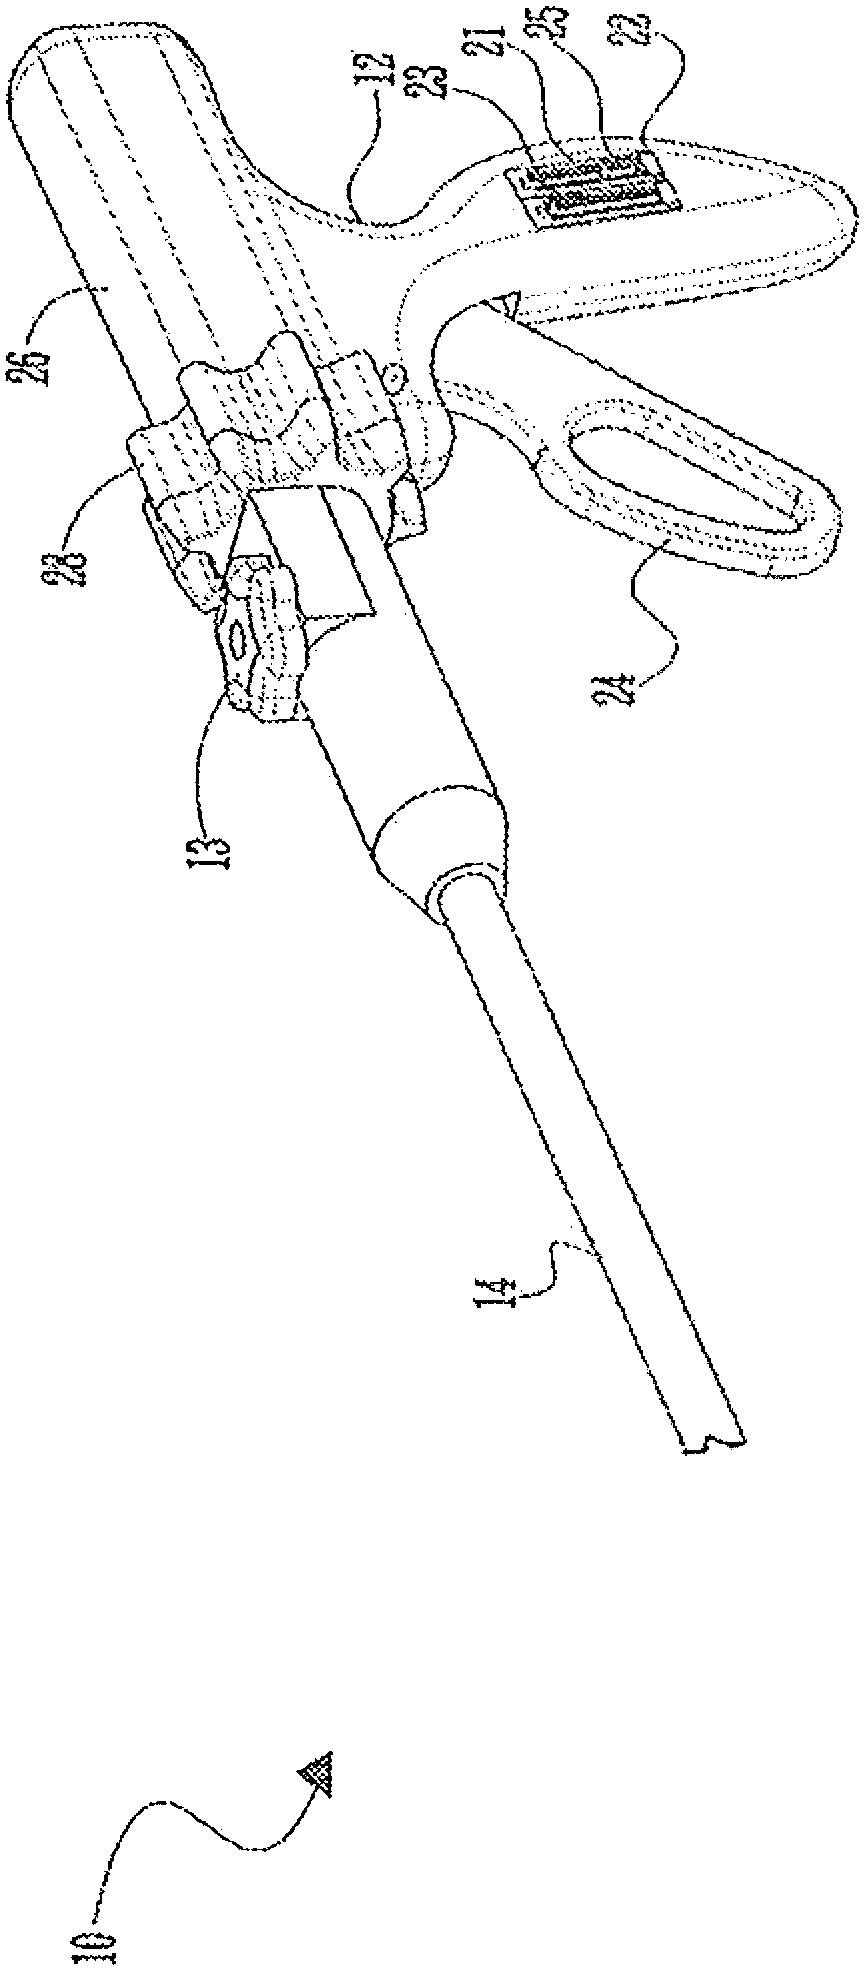 Tissue dissection and removal device